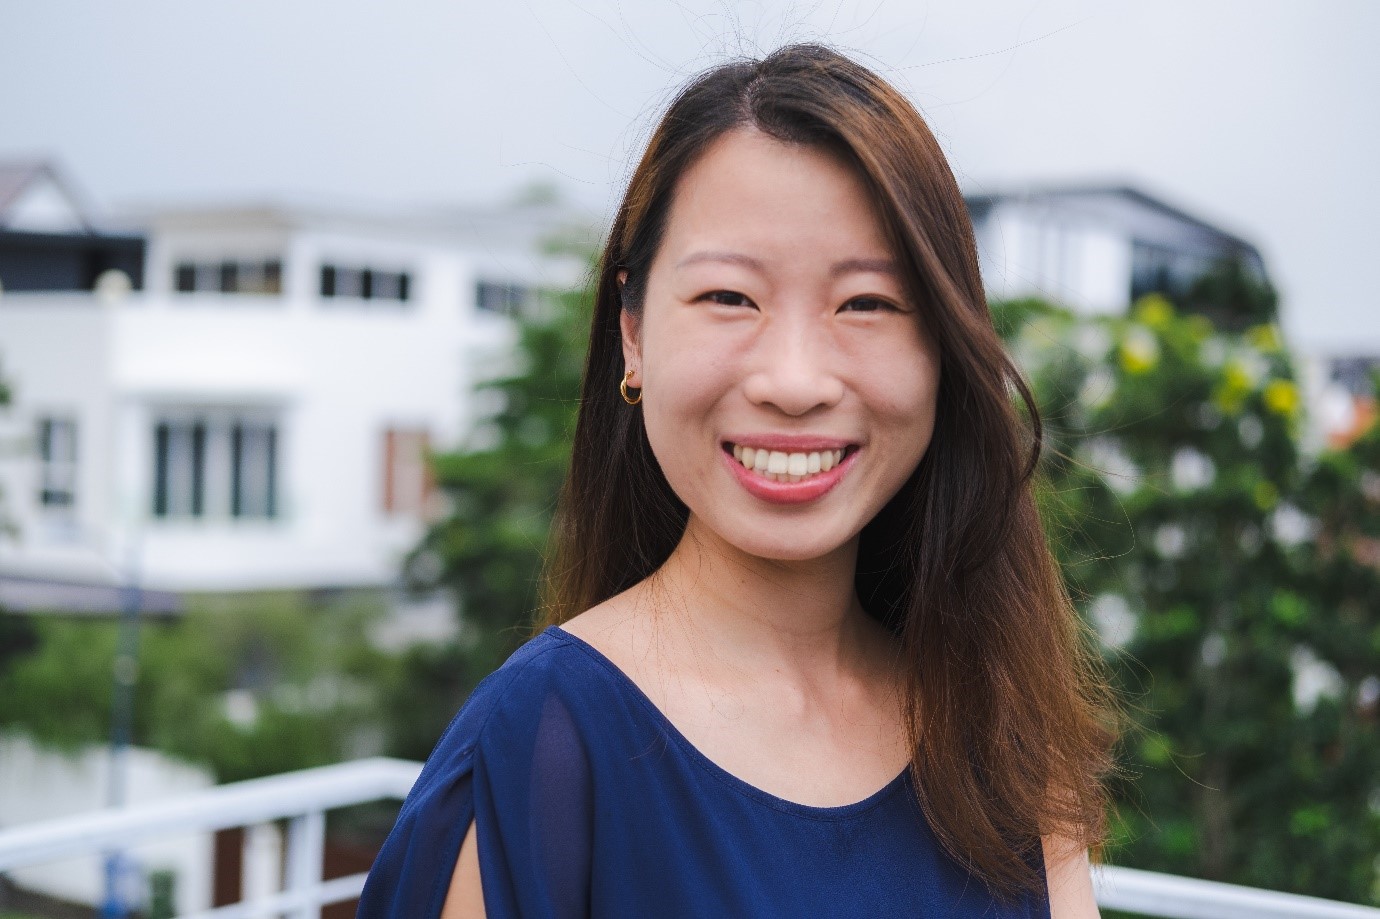 SG Digital Scholarship armed Rachel Sng with a Master's degree in data analytics